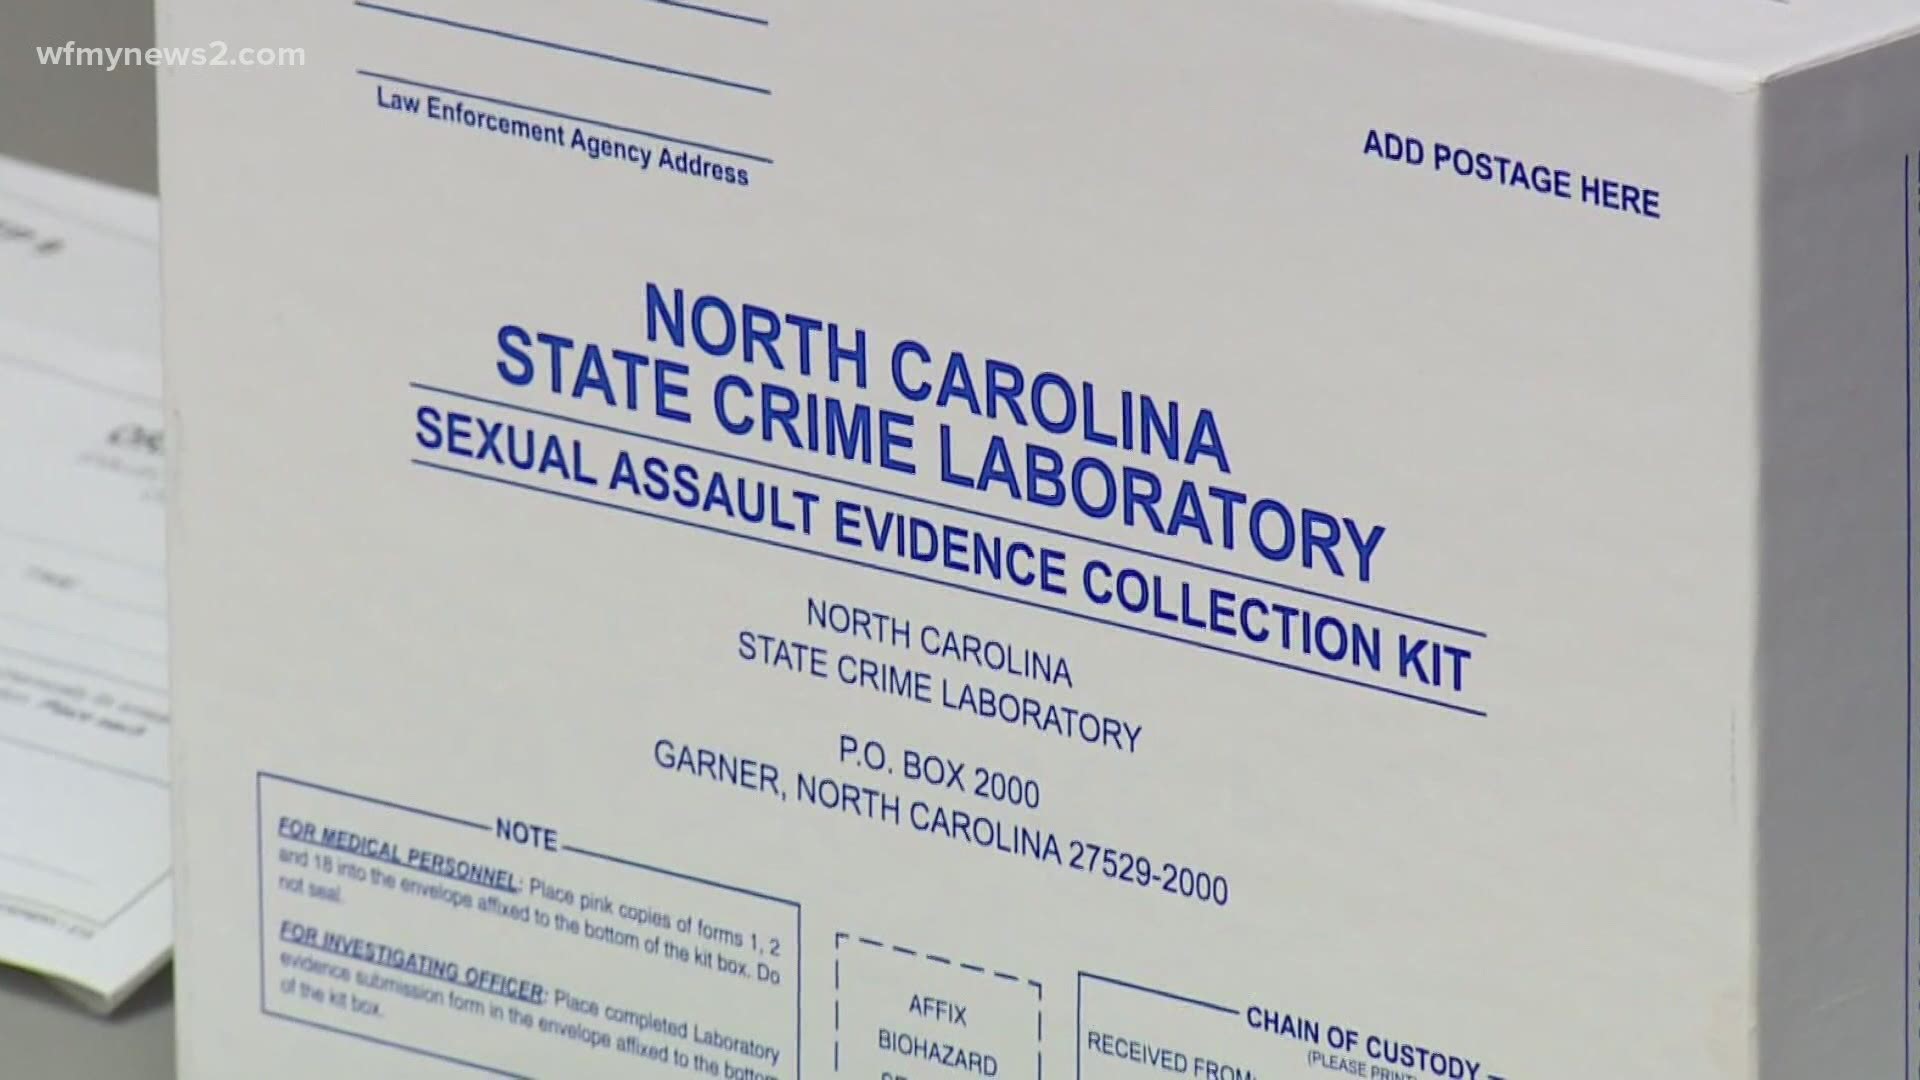 There are about 7,000 untested rape kits in North Carolina’s crime labs, and AG Josh Stein says it’s going to take $9 million to get them tested and processed.